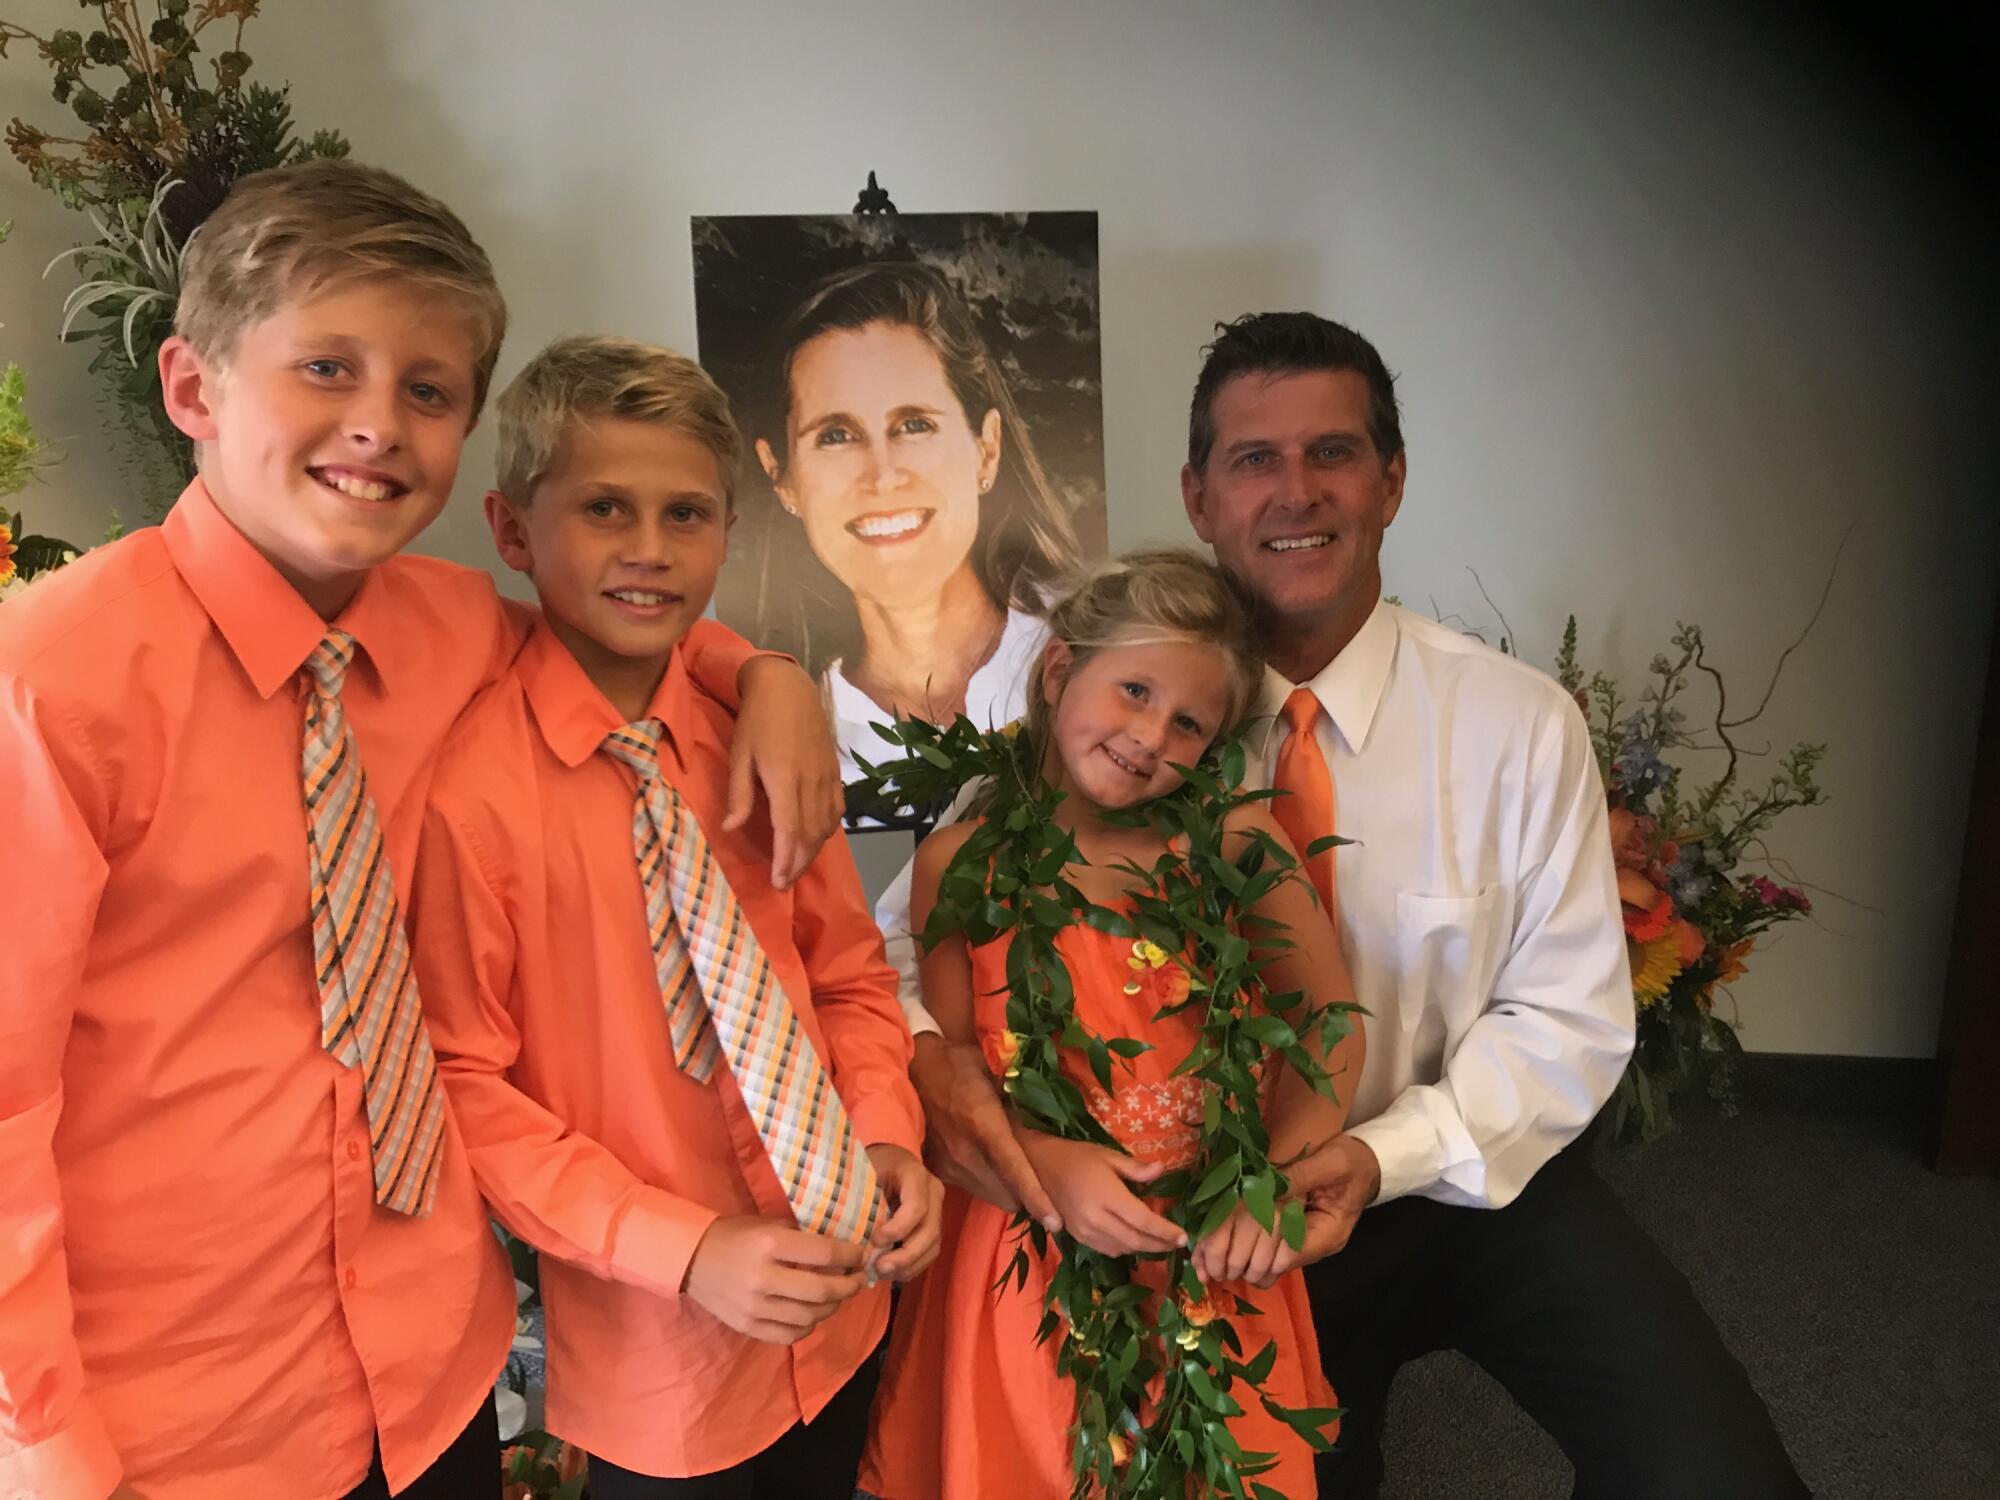 Jackson Diehl (left) poses with his siblings and father at the memorial service for his mother, Stephanie, in 2017.